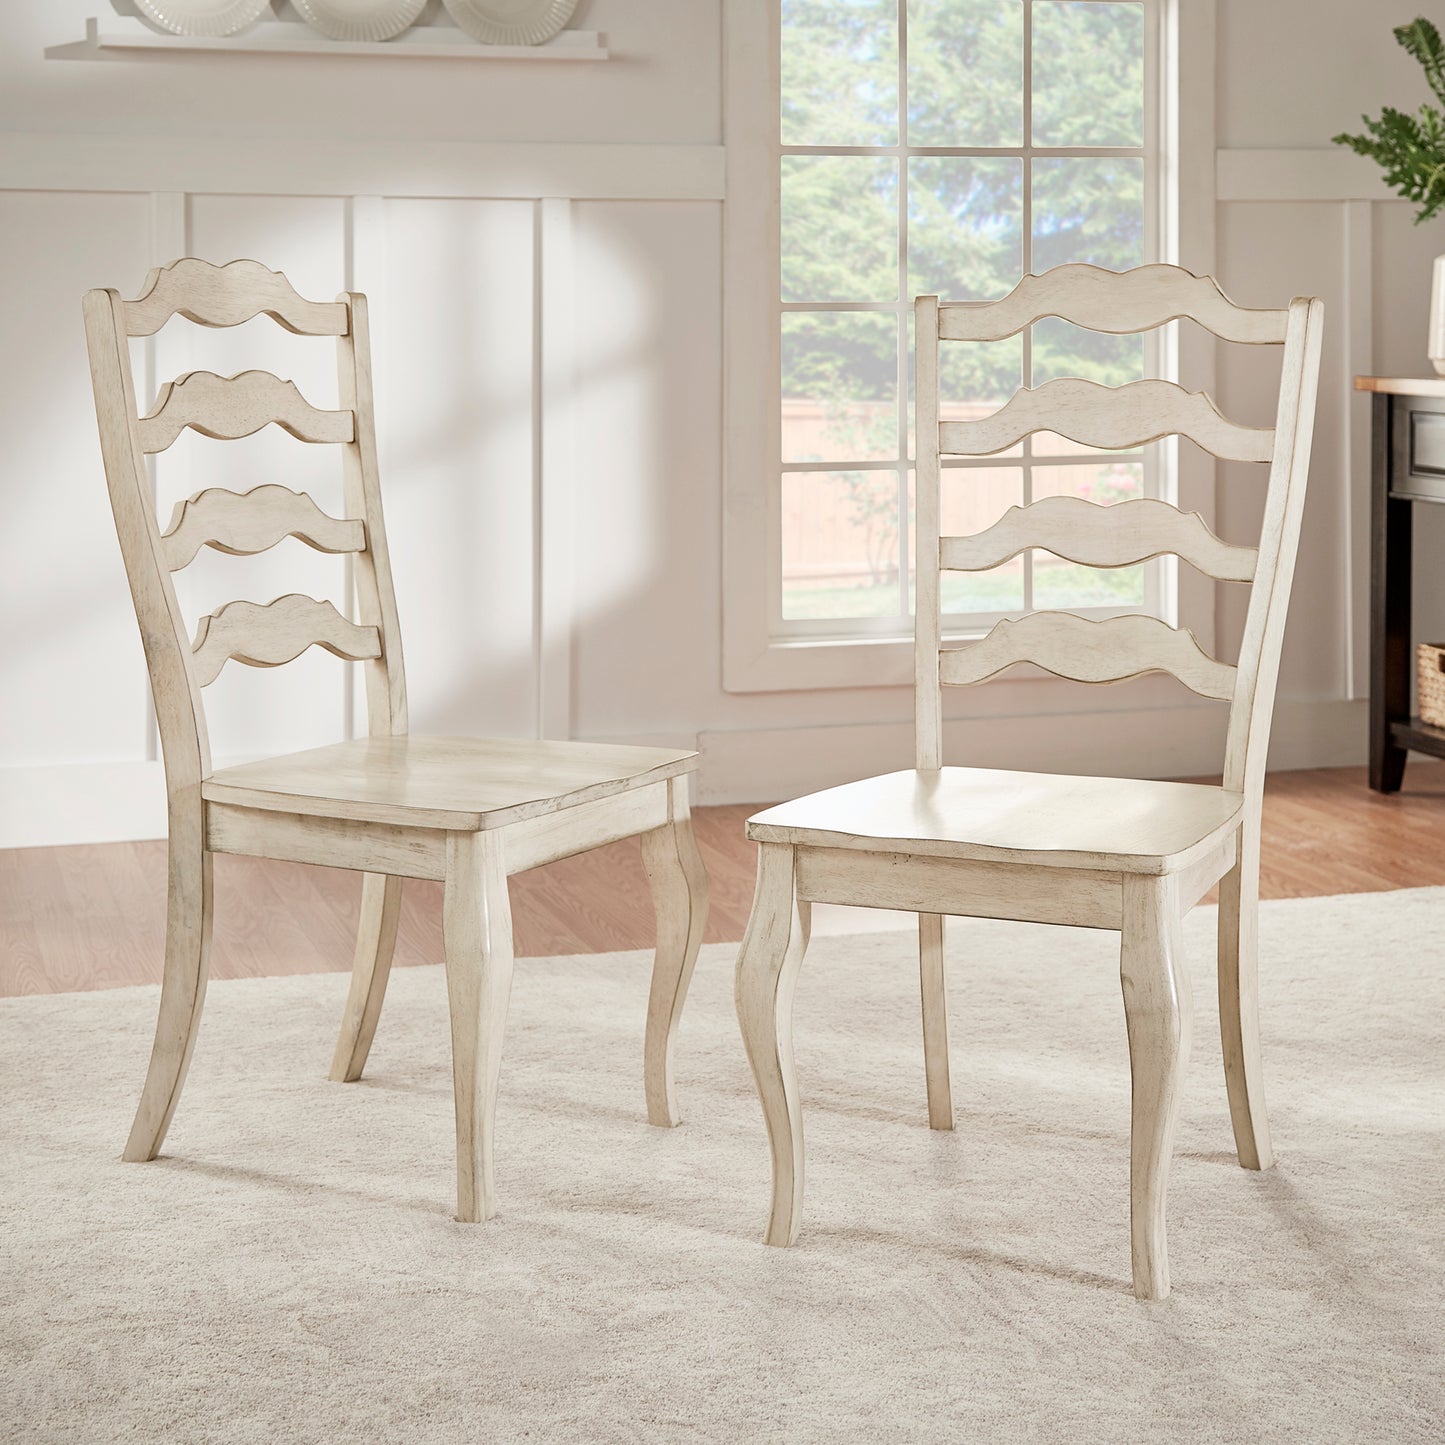 French Ladder Back Wood Dining Chairs (Set of 2) - Antique White